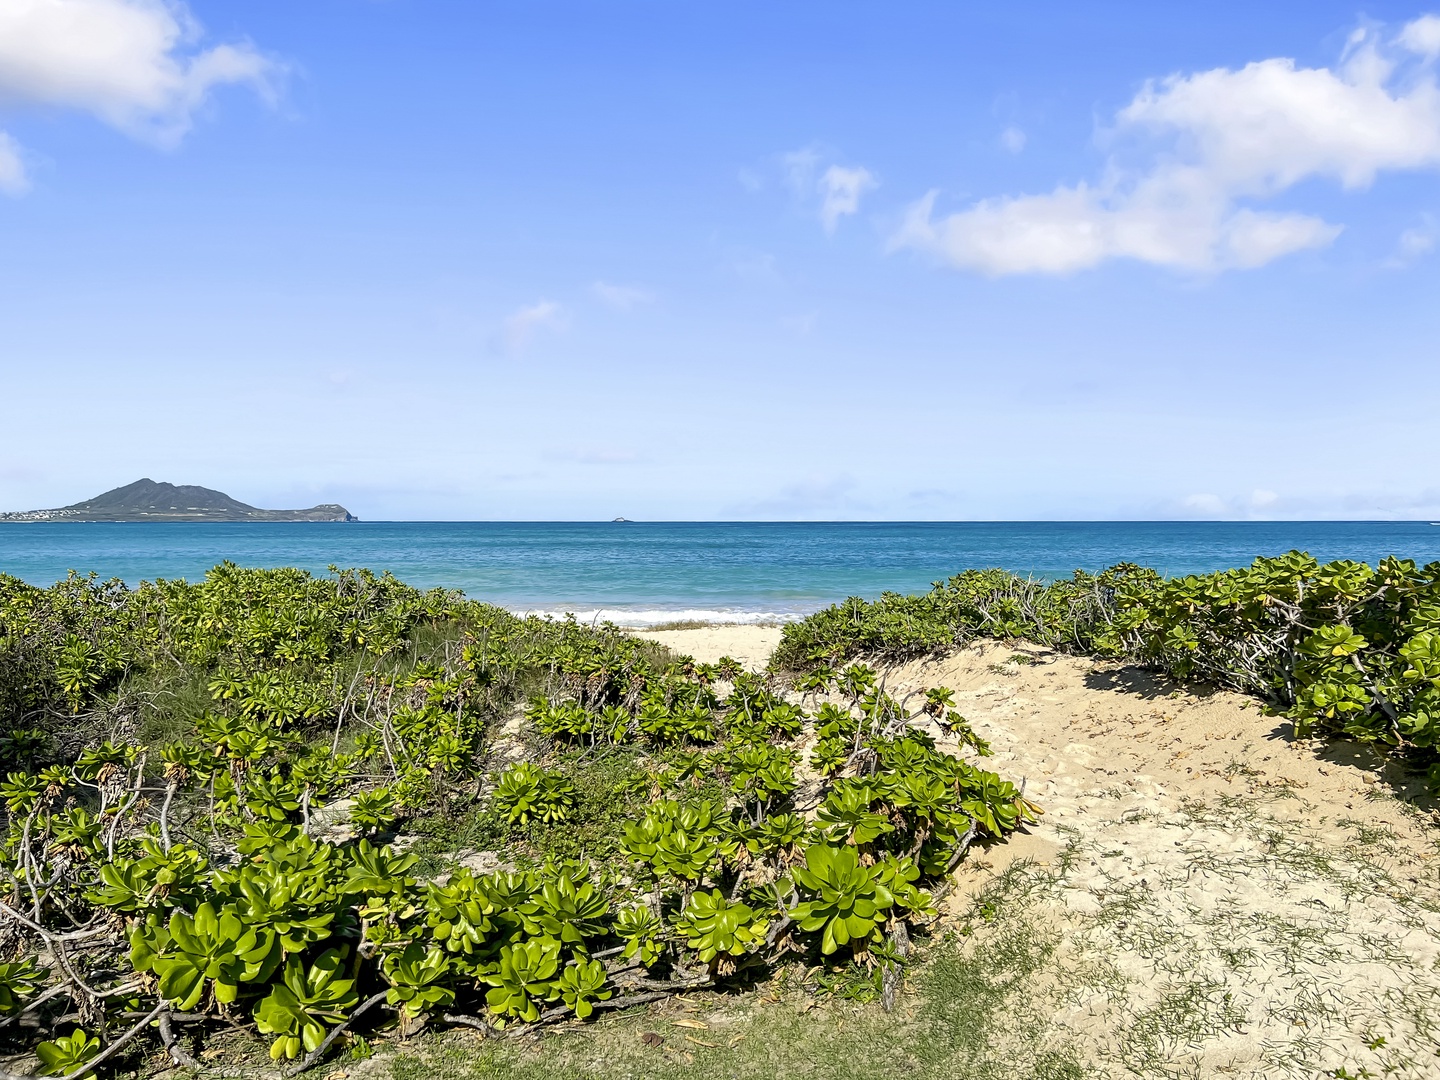 Kailua Vacation Rentals, Kai Mele - Enjoy early morning walks on the beach from your front door!